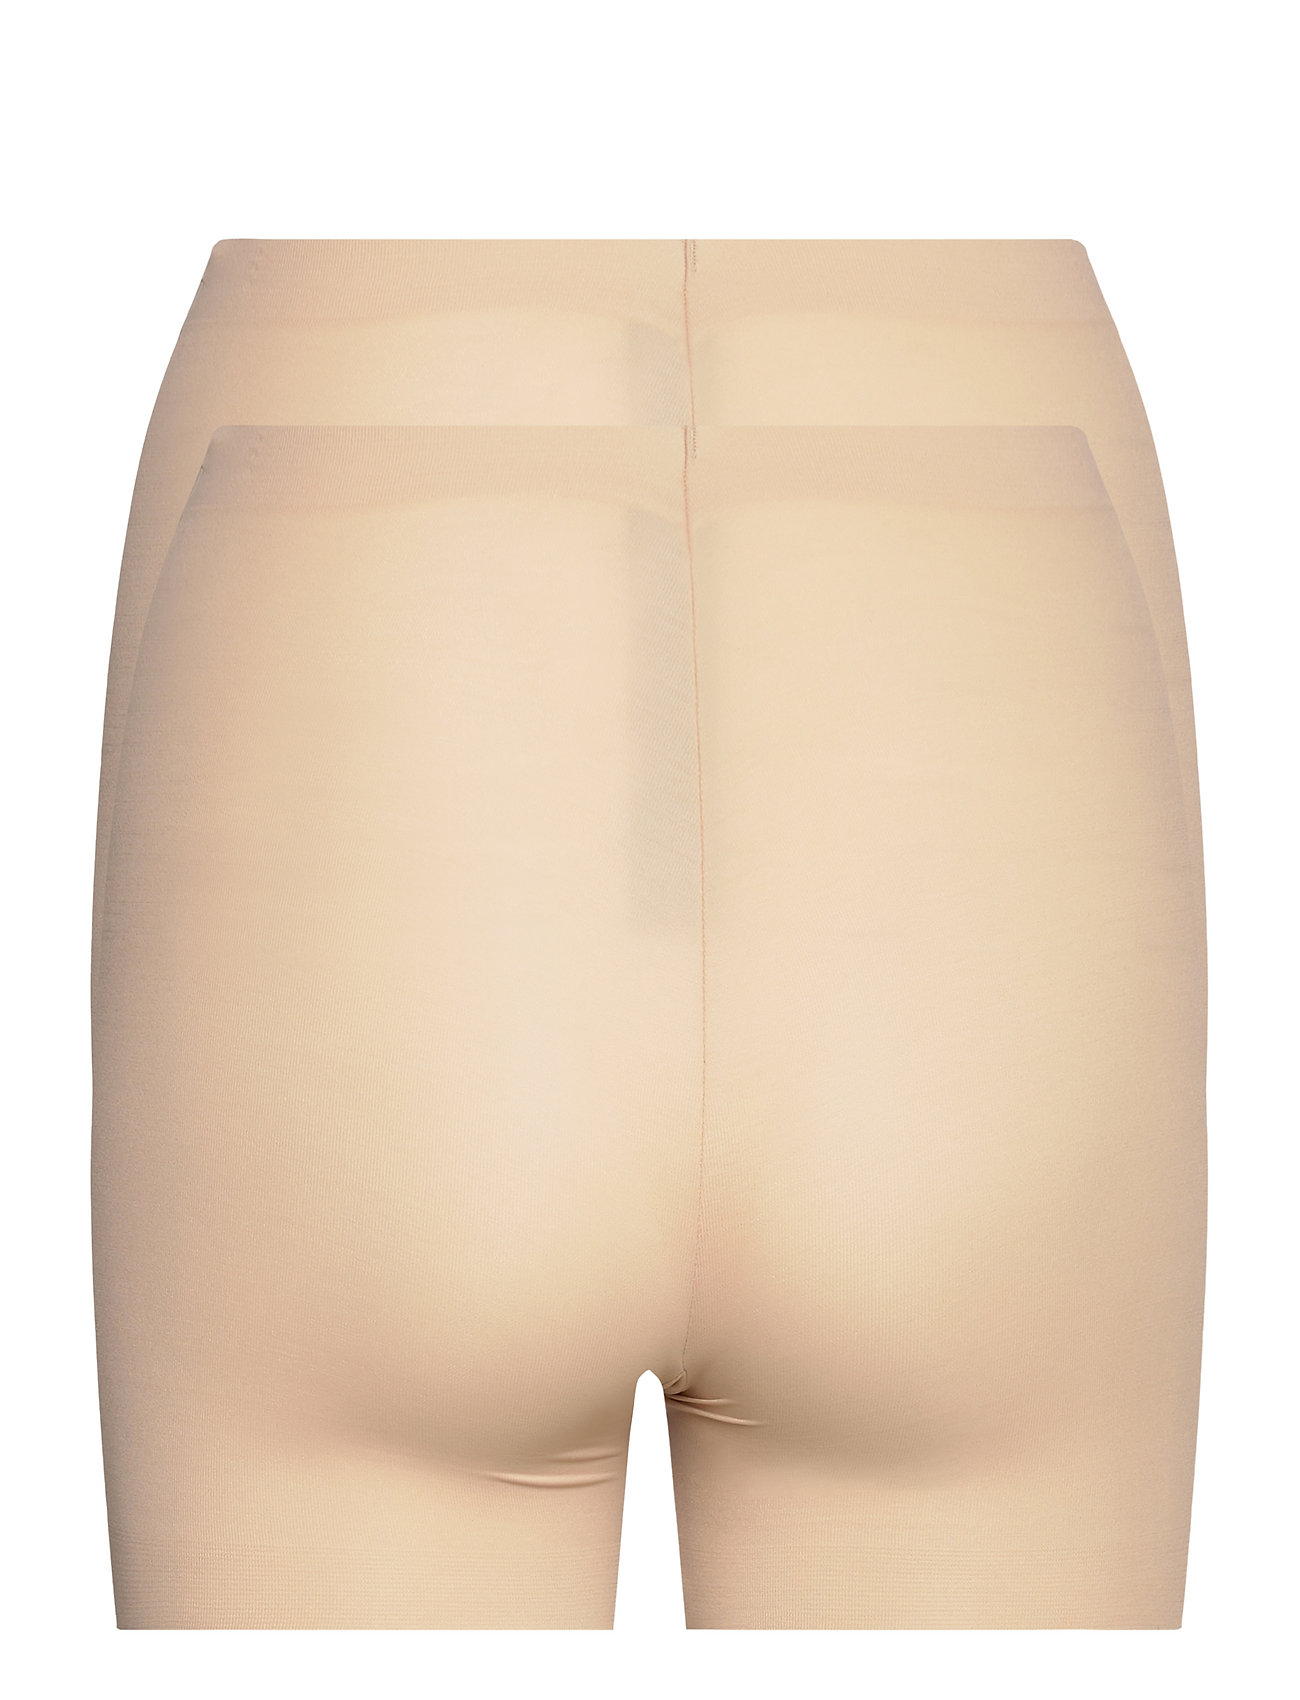 Maidenform - COVER YOUR BASES - Šorti - nude1/transp/nude1/transp - 1